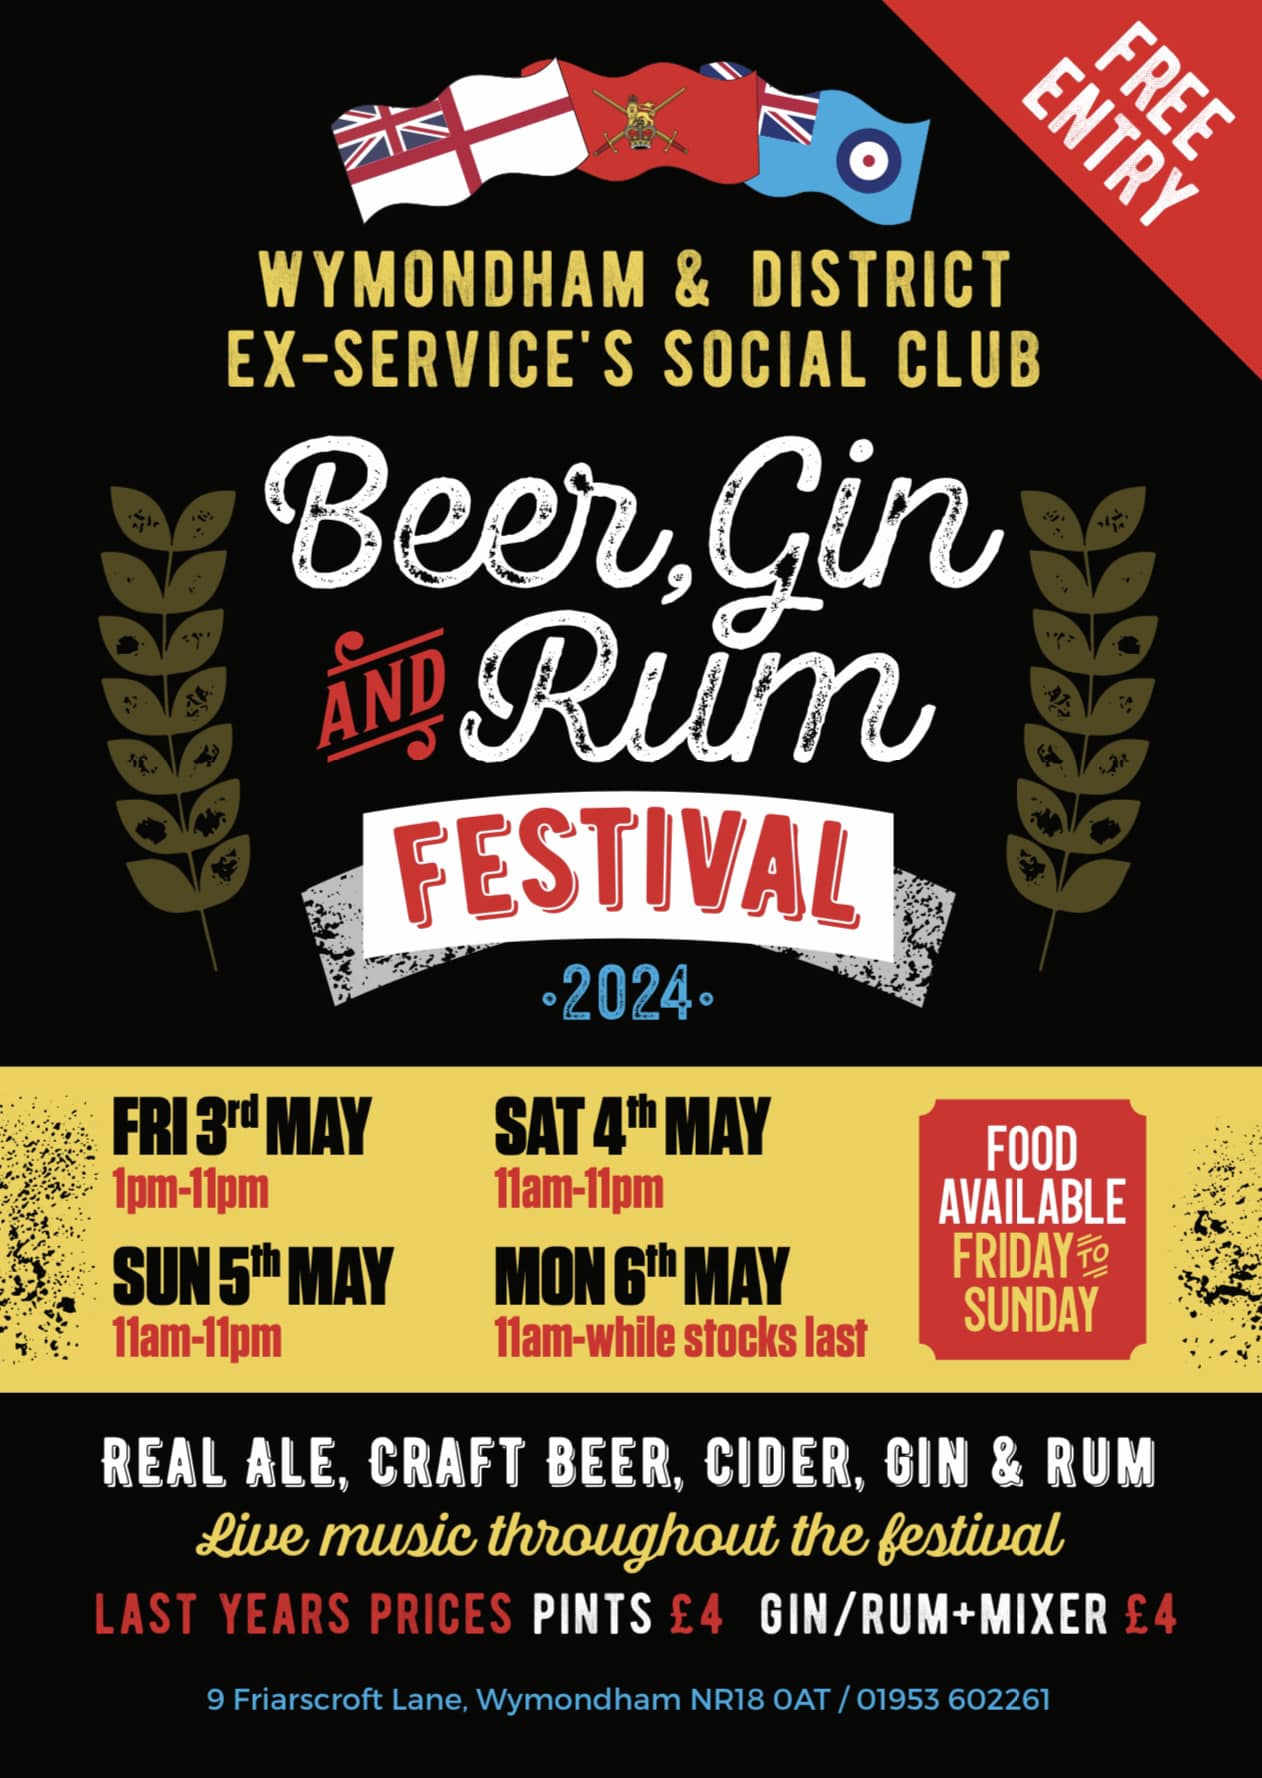 Beer, Gin & Rum Festival – Wymondham & District Ex-Services Club, 3rd-6th May